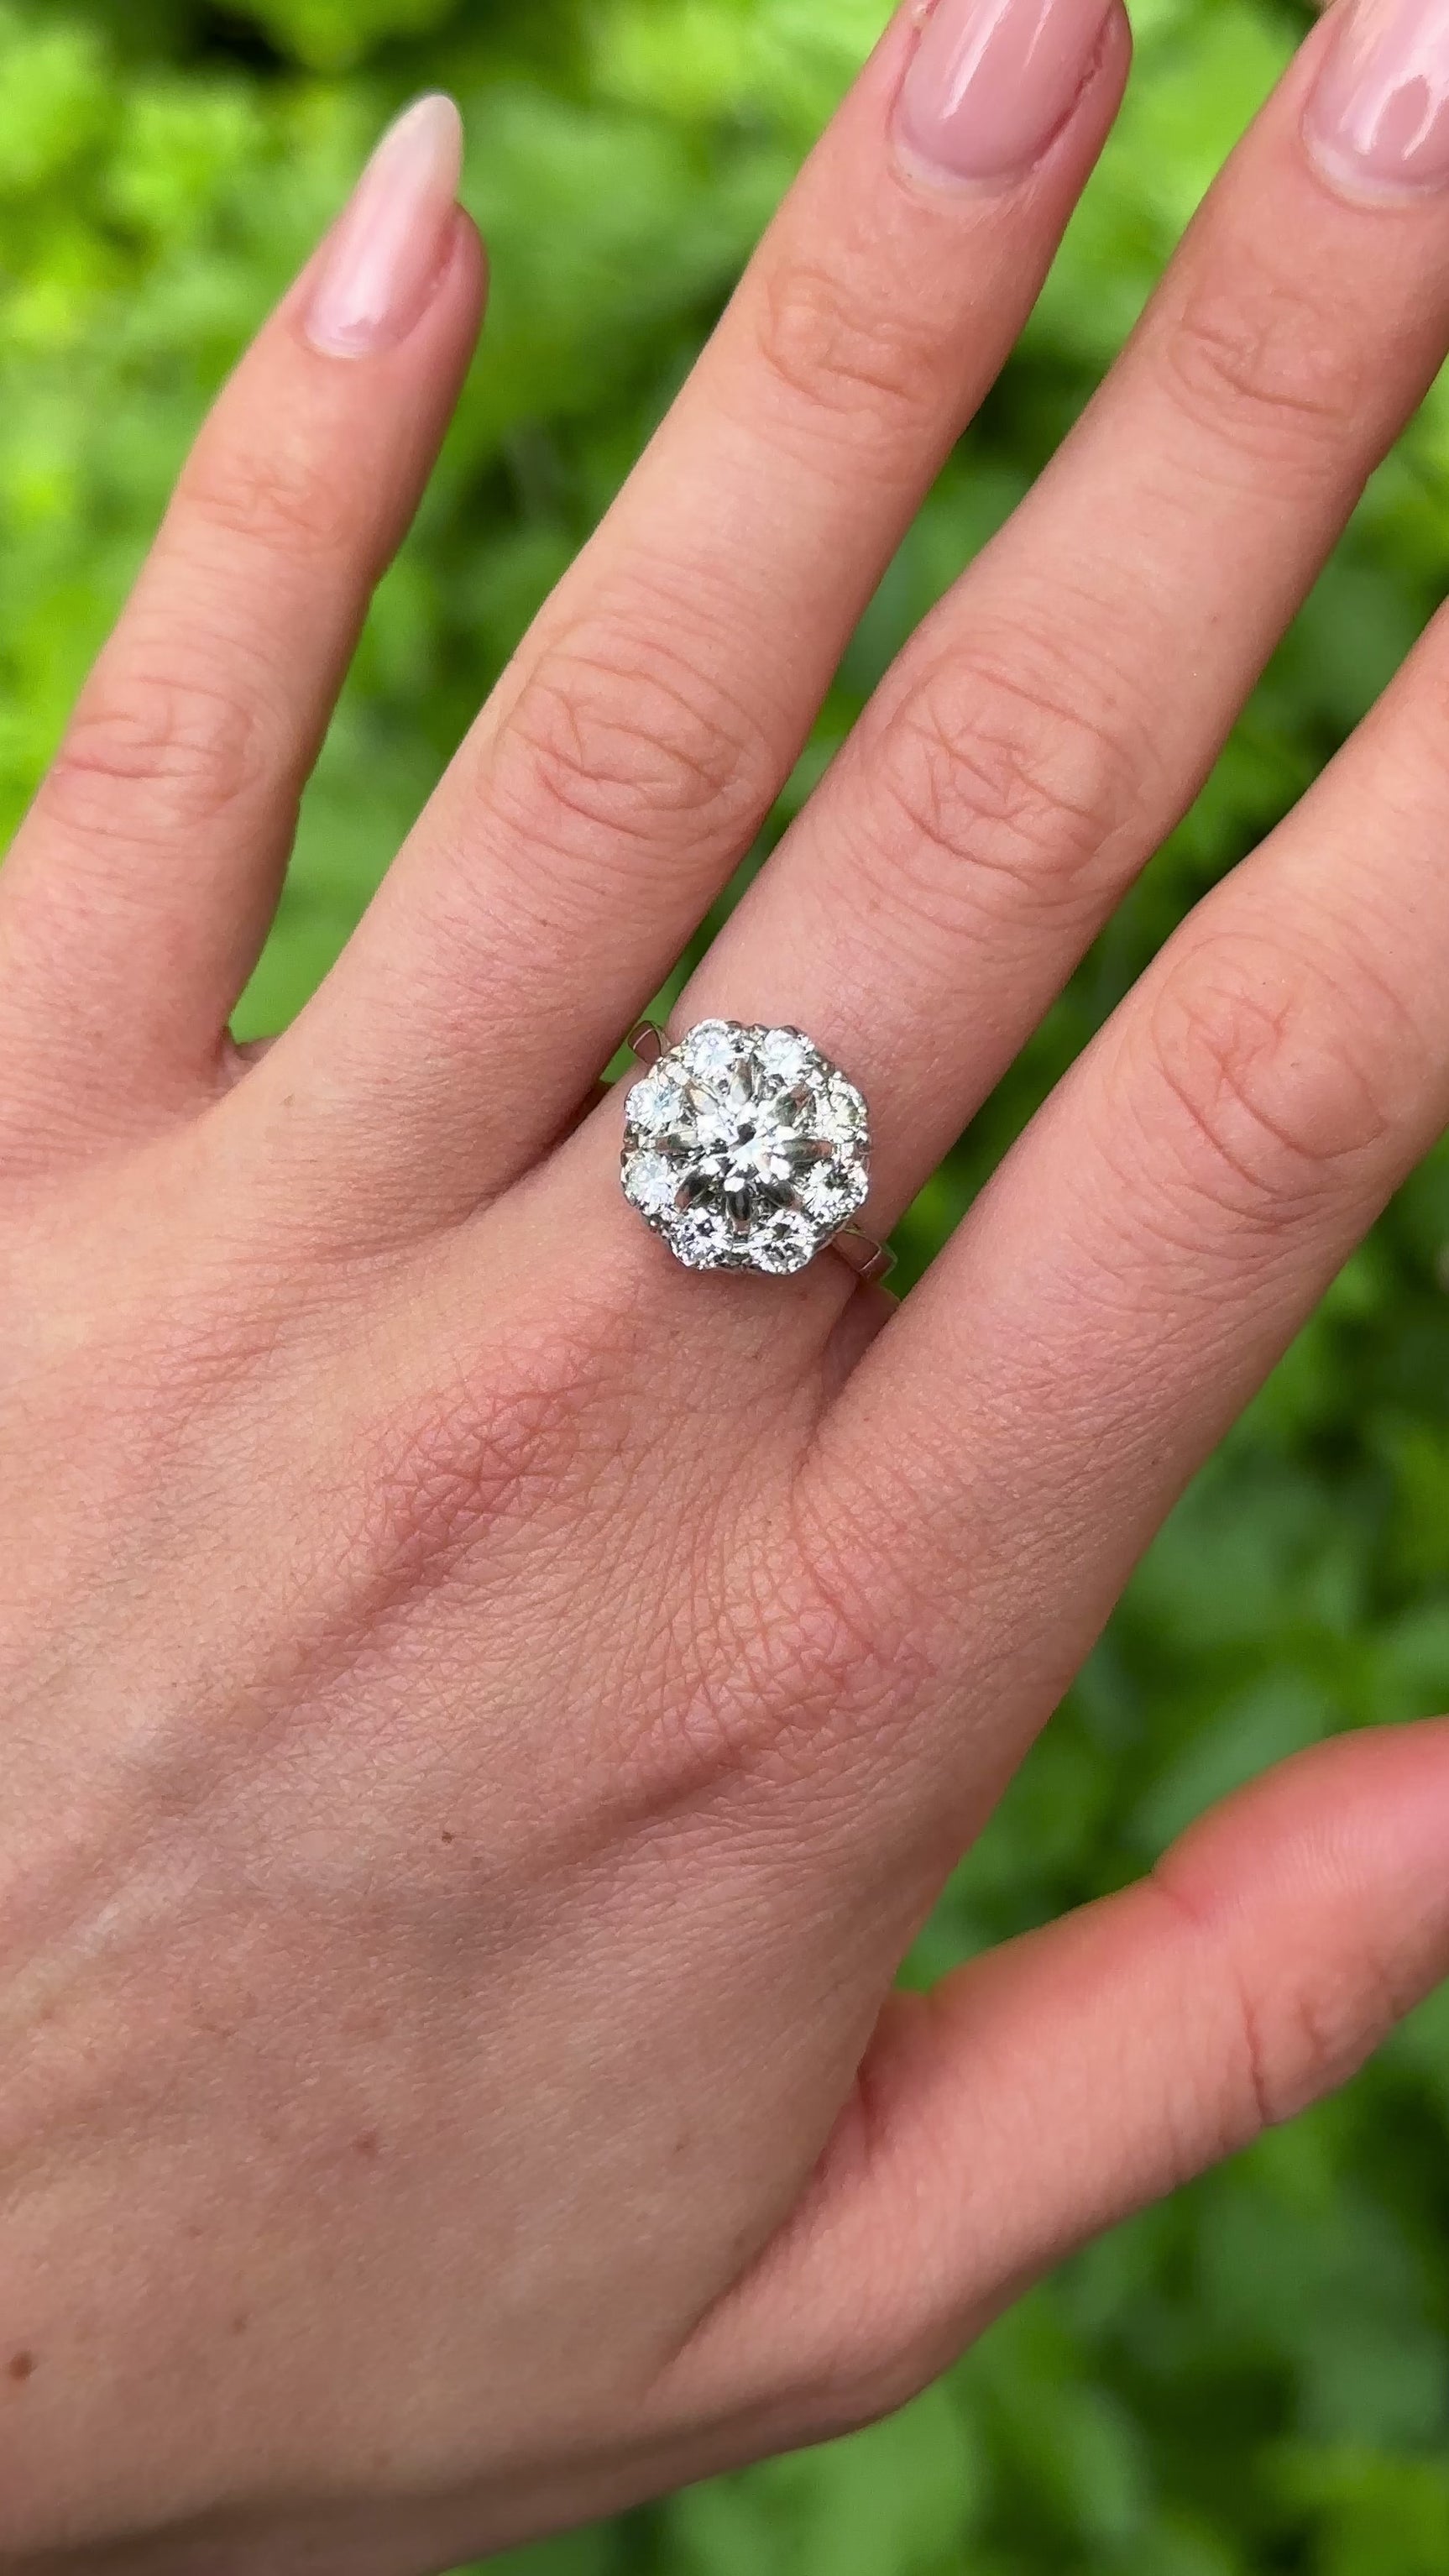 Vintage, Diamond Cluster Engagement Ring, 18ct White GoldVintage, Diamond Cluster Engagement Ring, 18ct White Gold worn on hand.